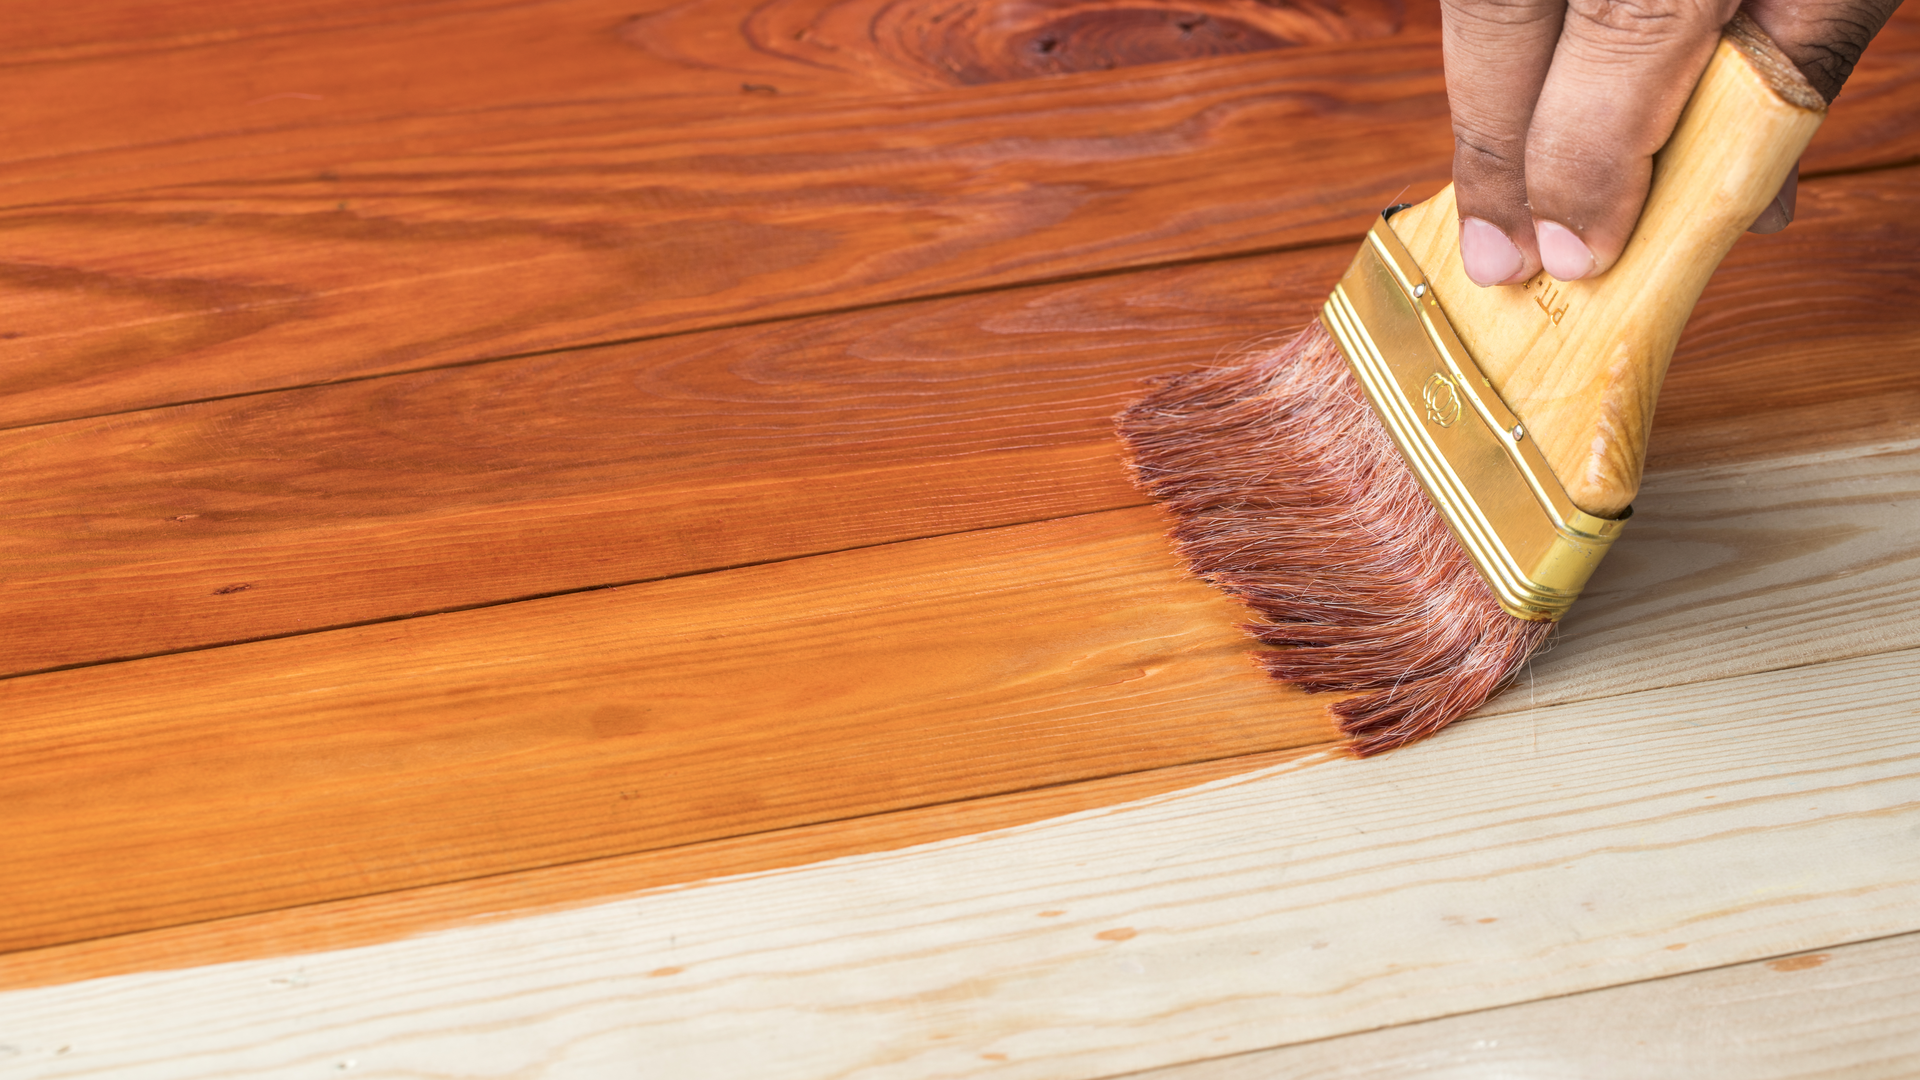 Staining & Refinishing a Table Top: A How-To Guide